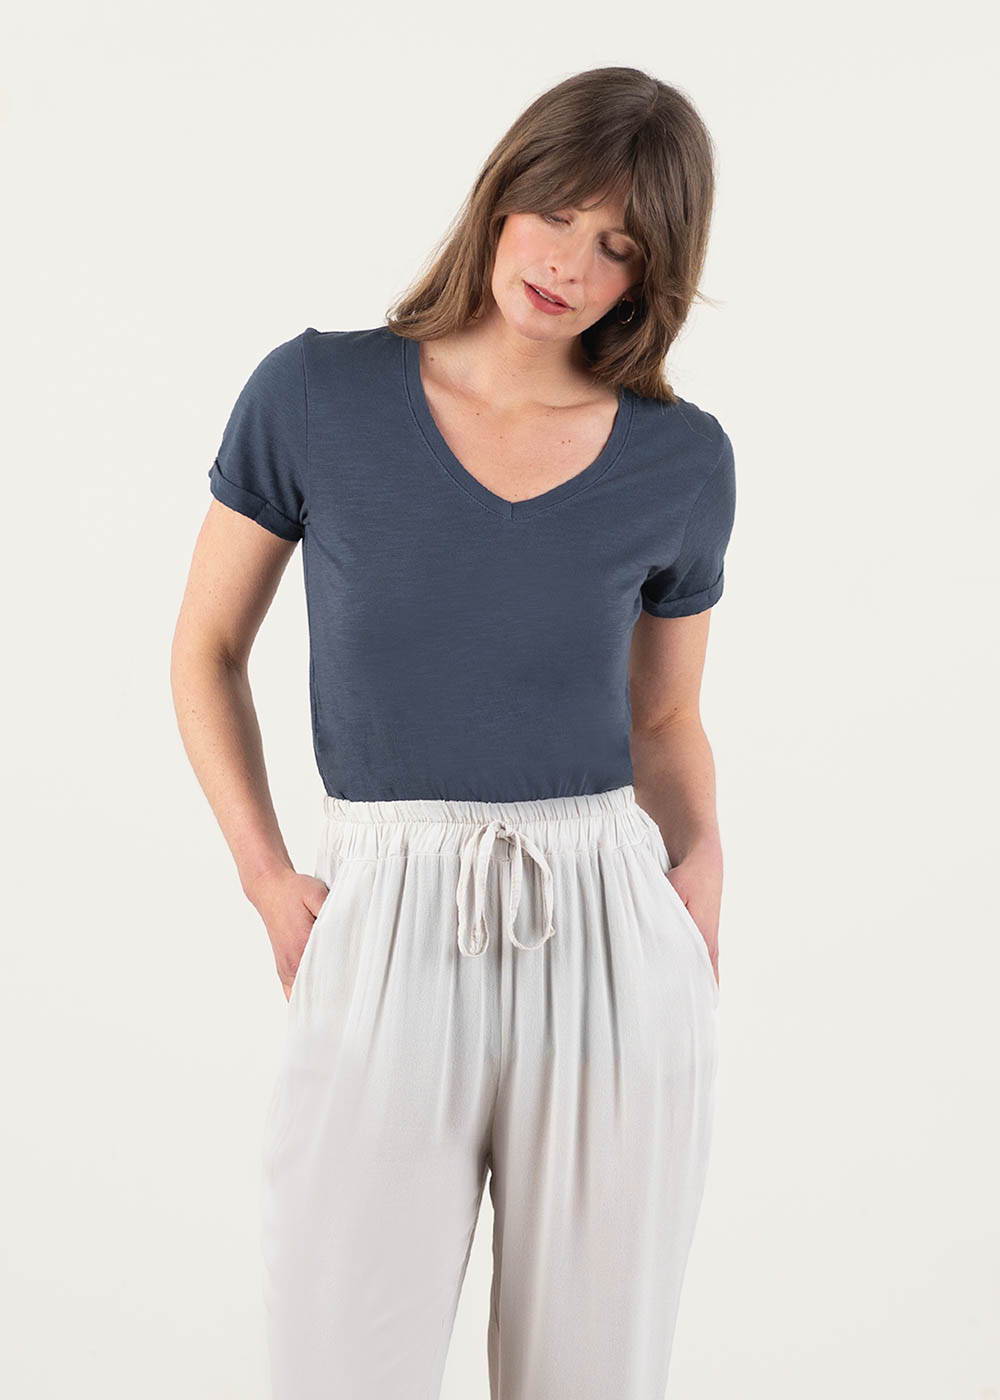 A model wearing a blue - grey v neck short sleeved t shirt with oatmeal trousers